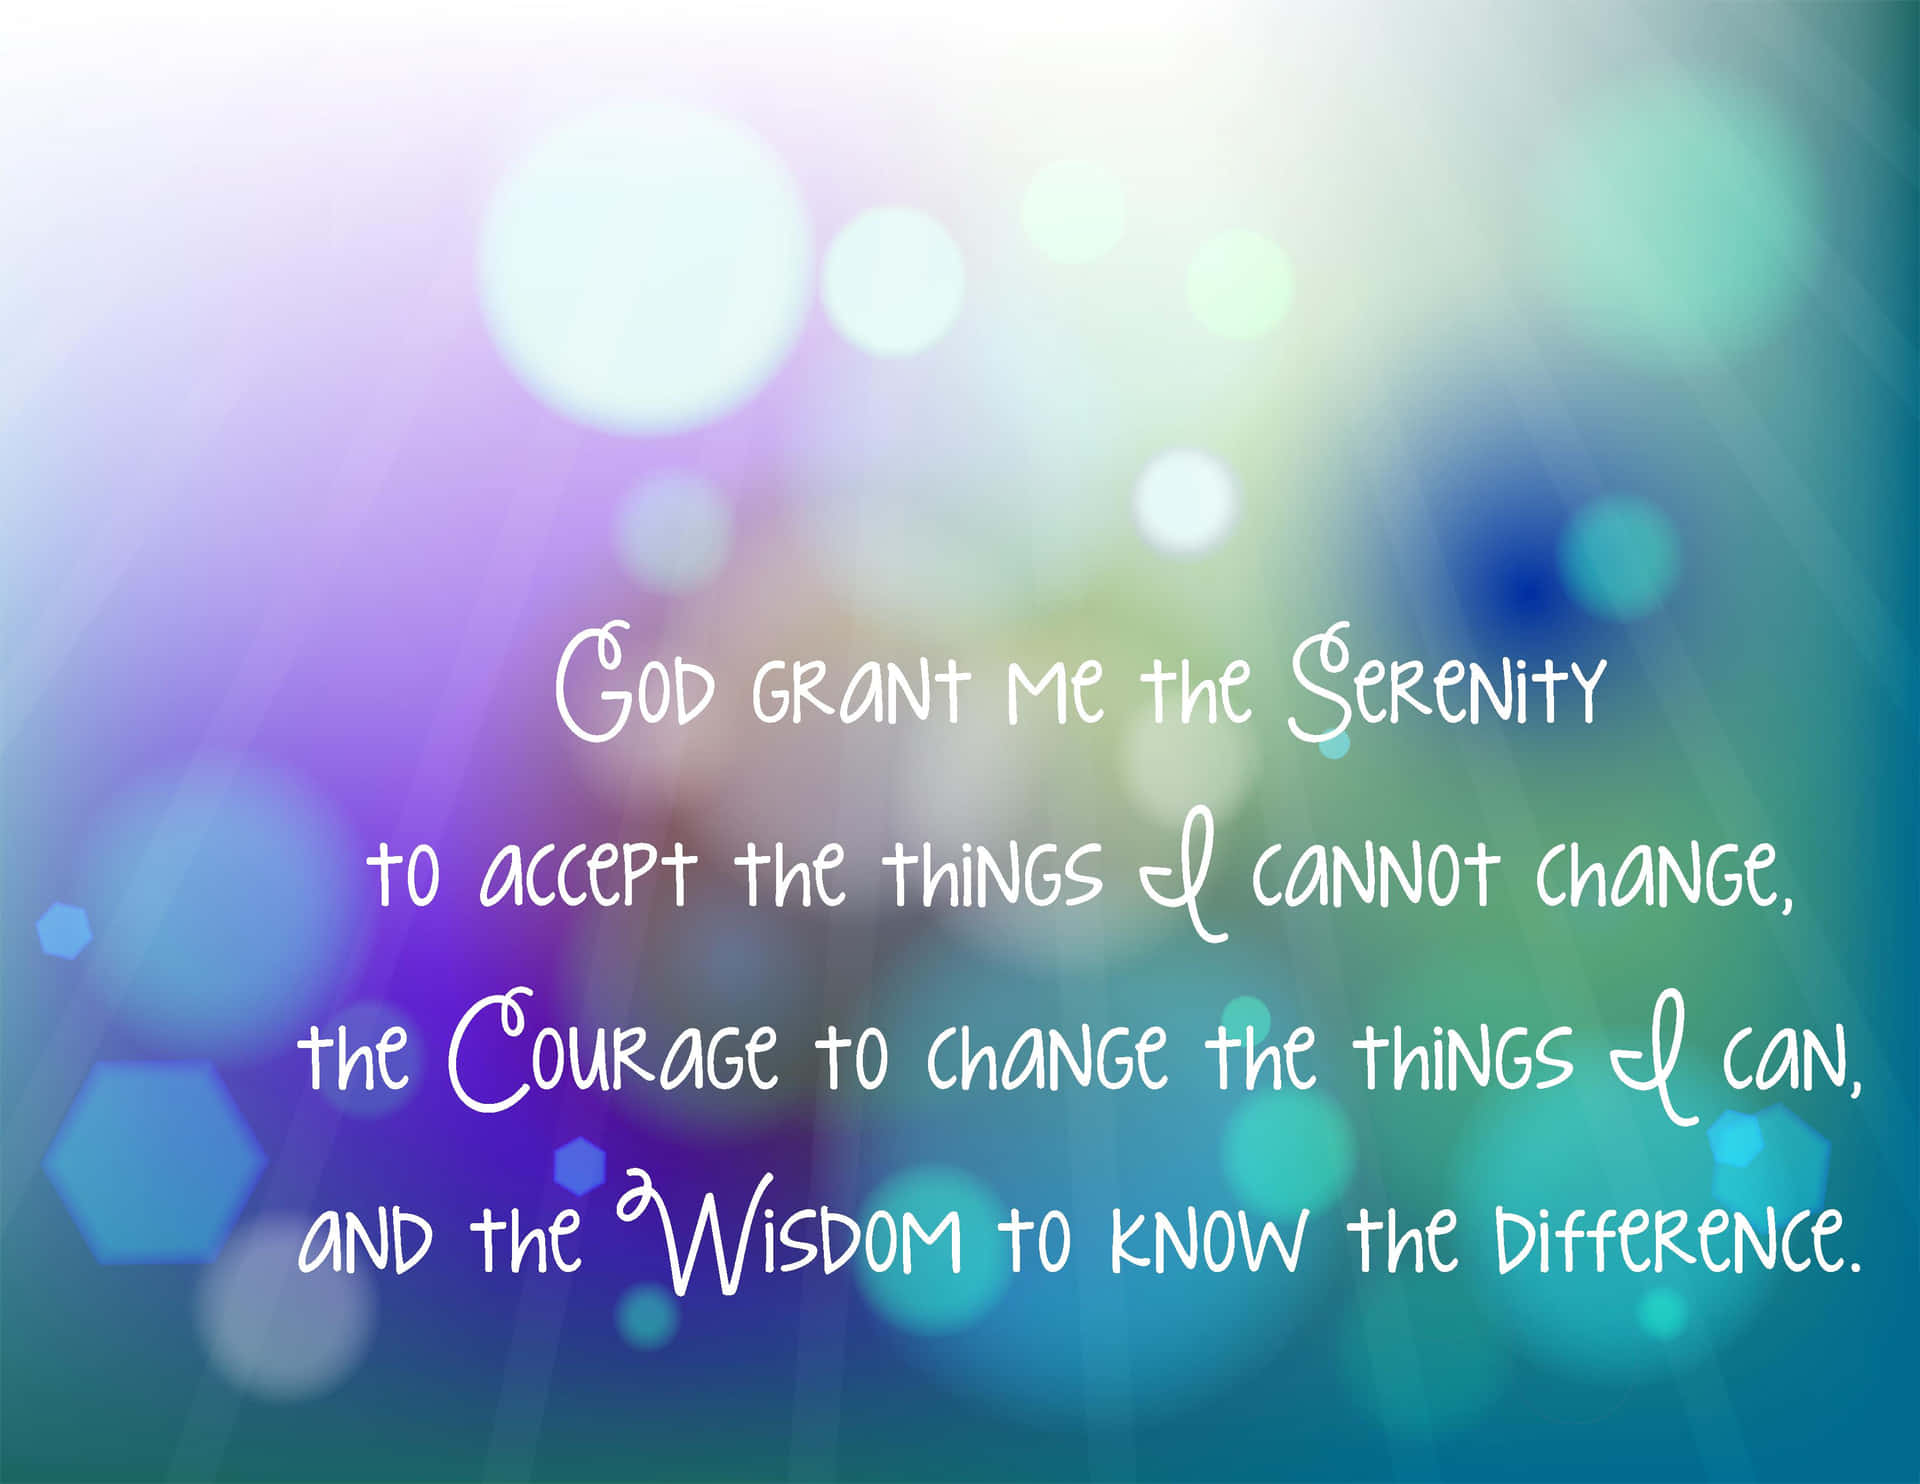 Find Peace In The Serenity Prayer